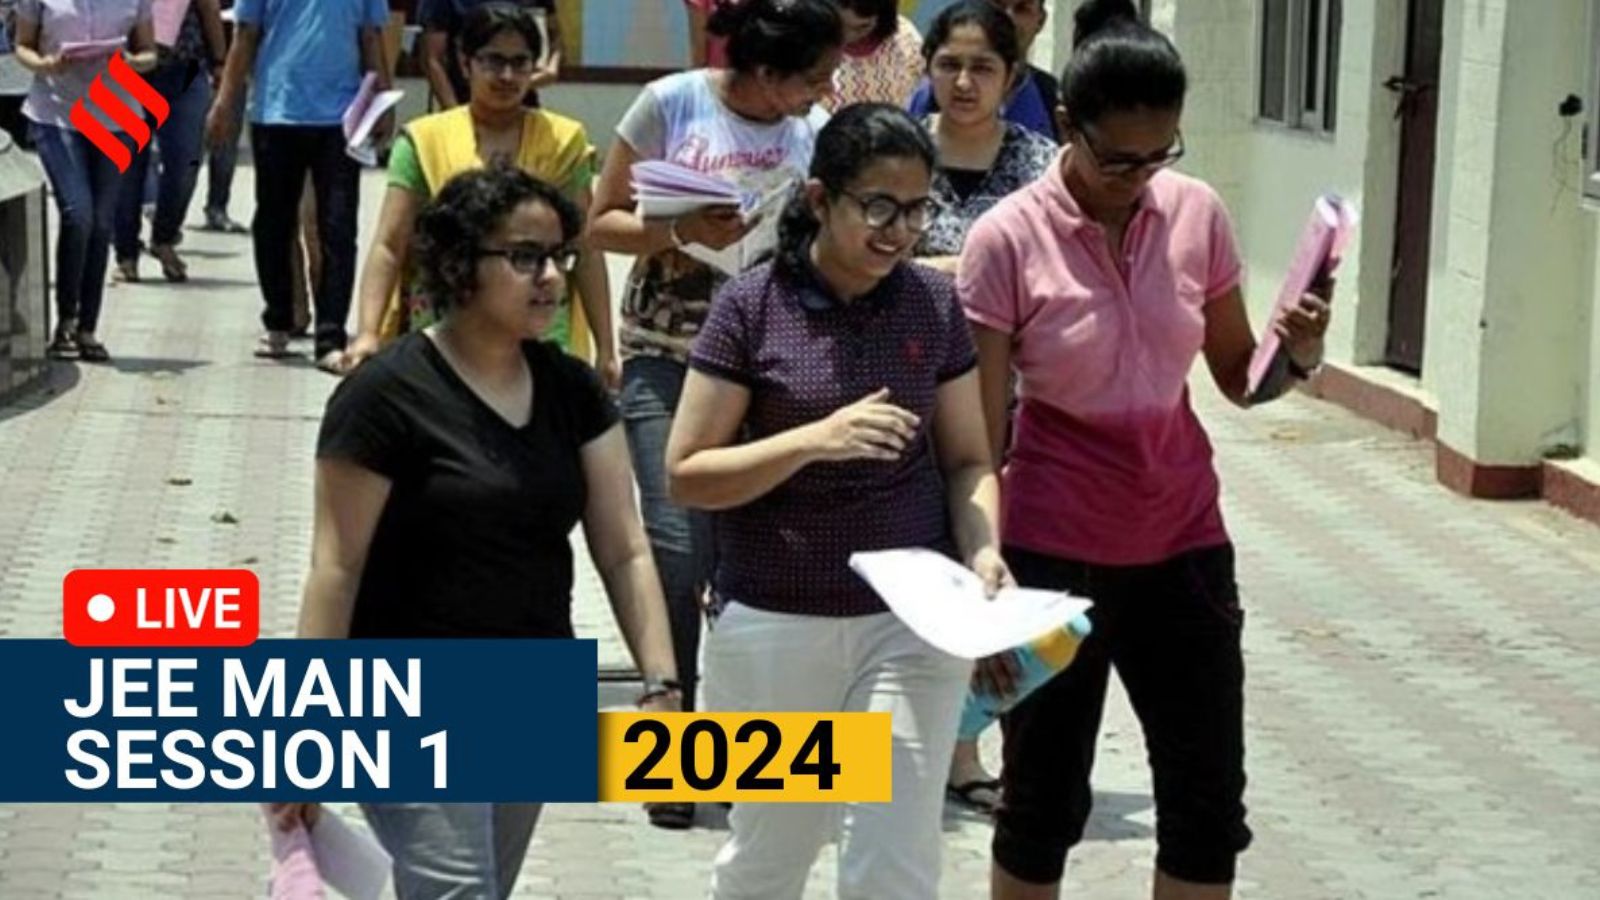 JEE Main 2024 Updates JEE city intimation slip for Paper 1 exam soon